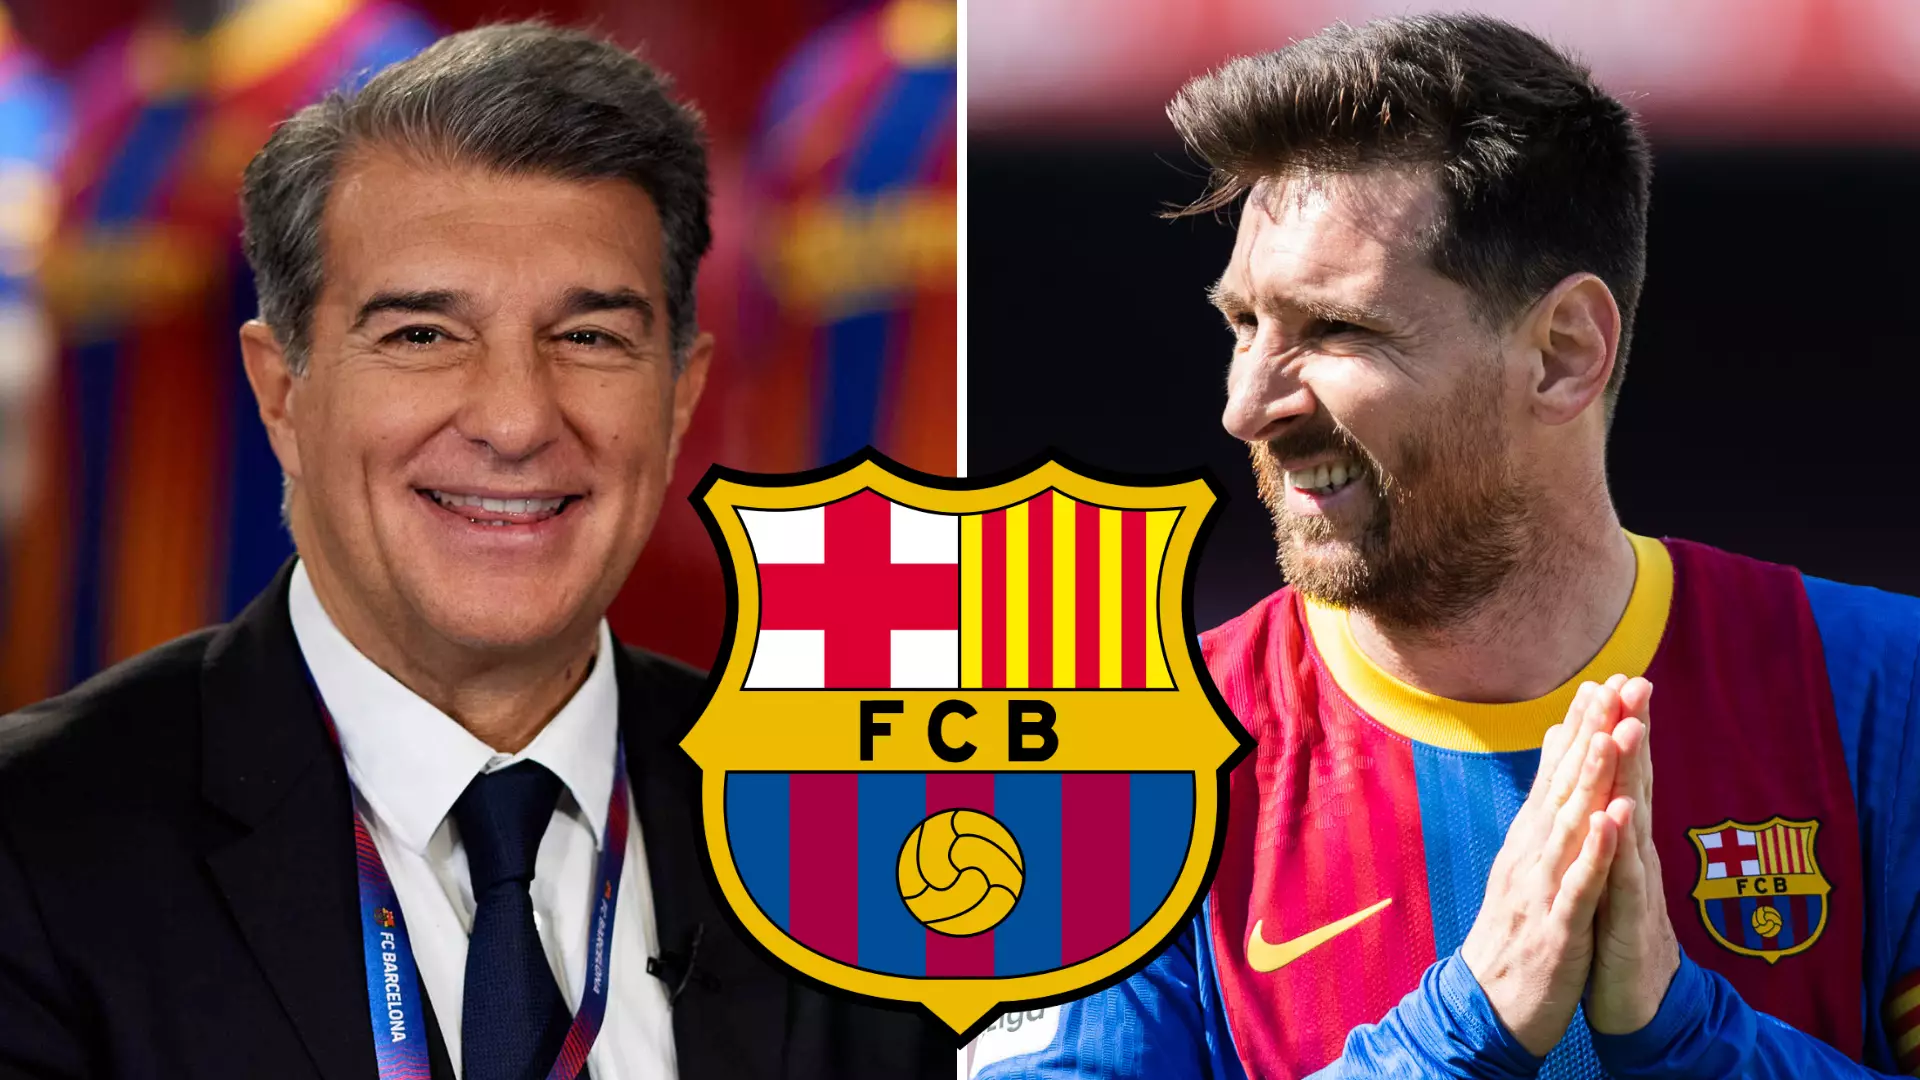 Lionel Messi's Football Future And Potential Retirement Outlined In Staggering New Barcelona Deal